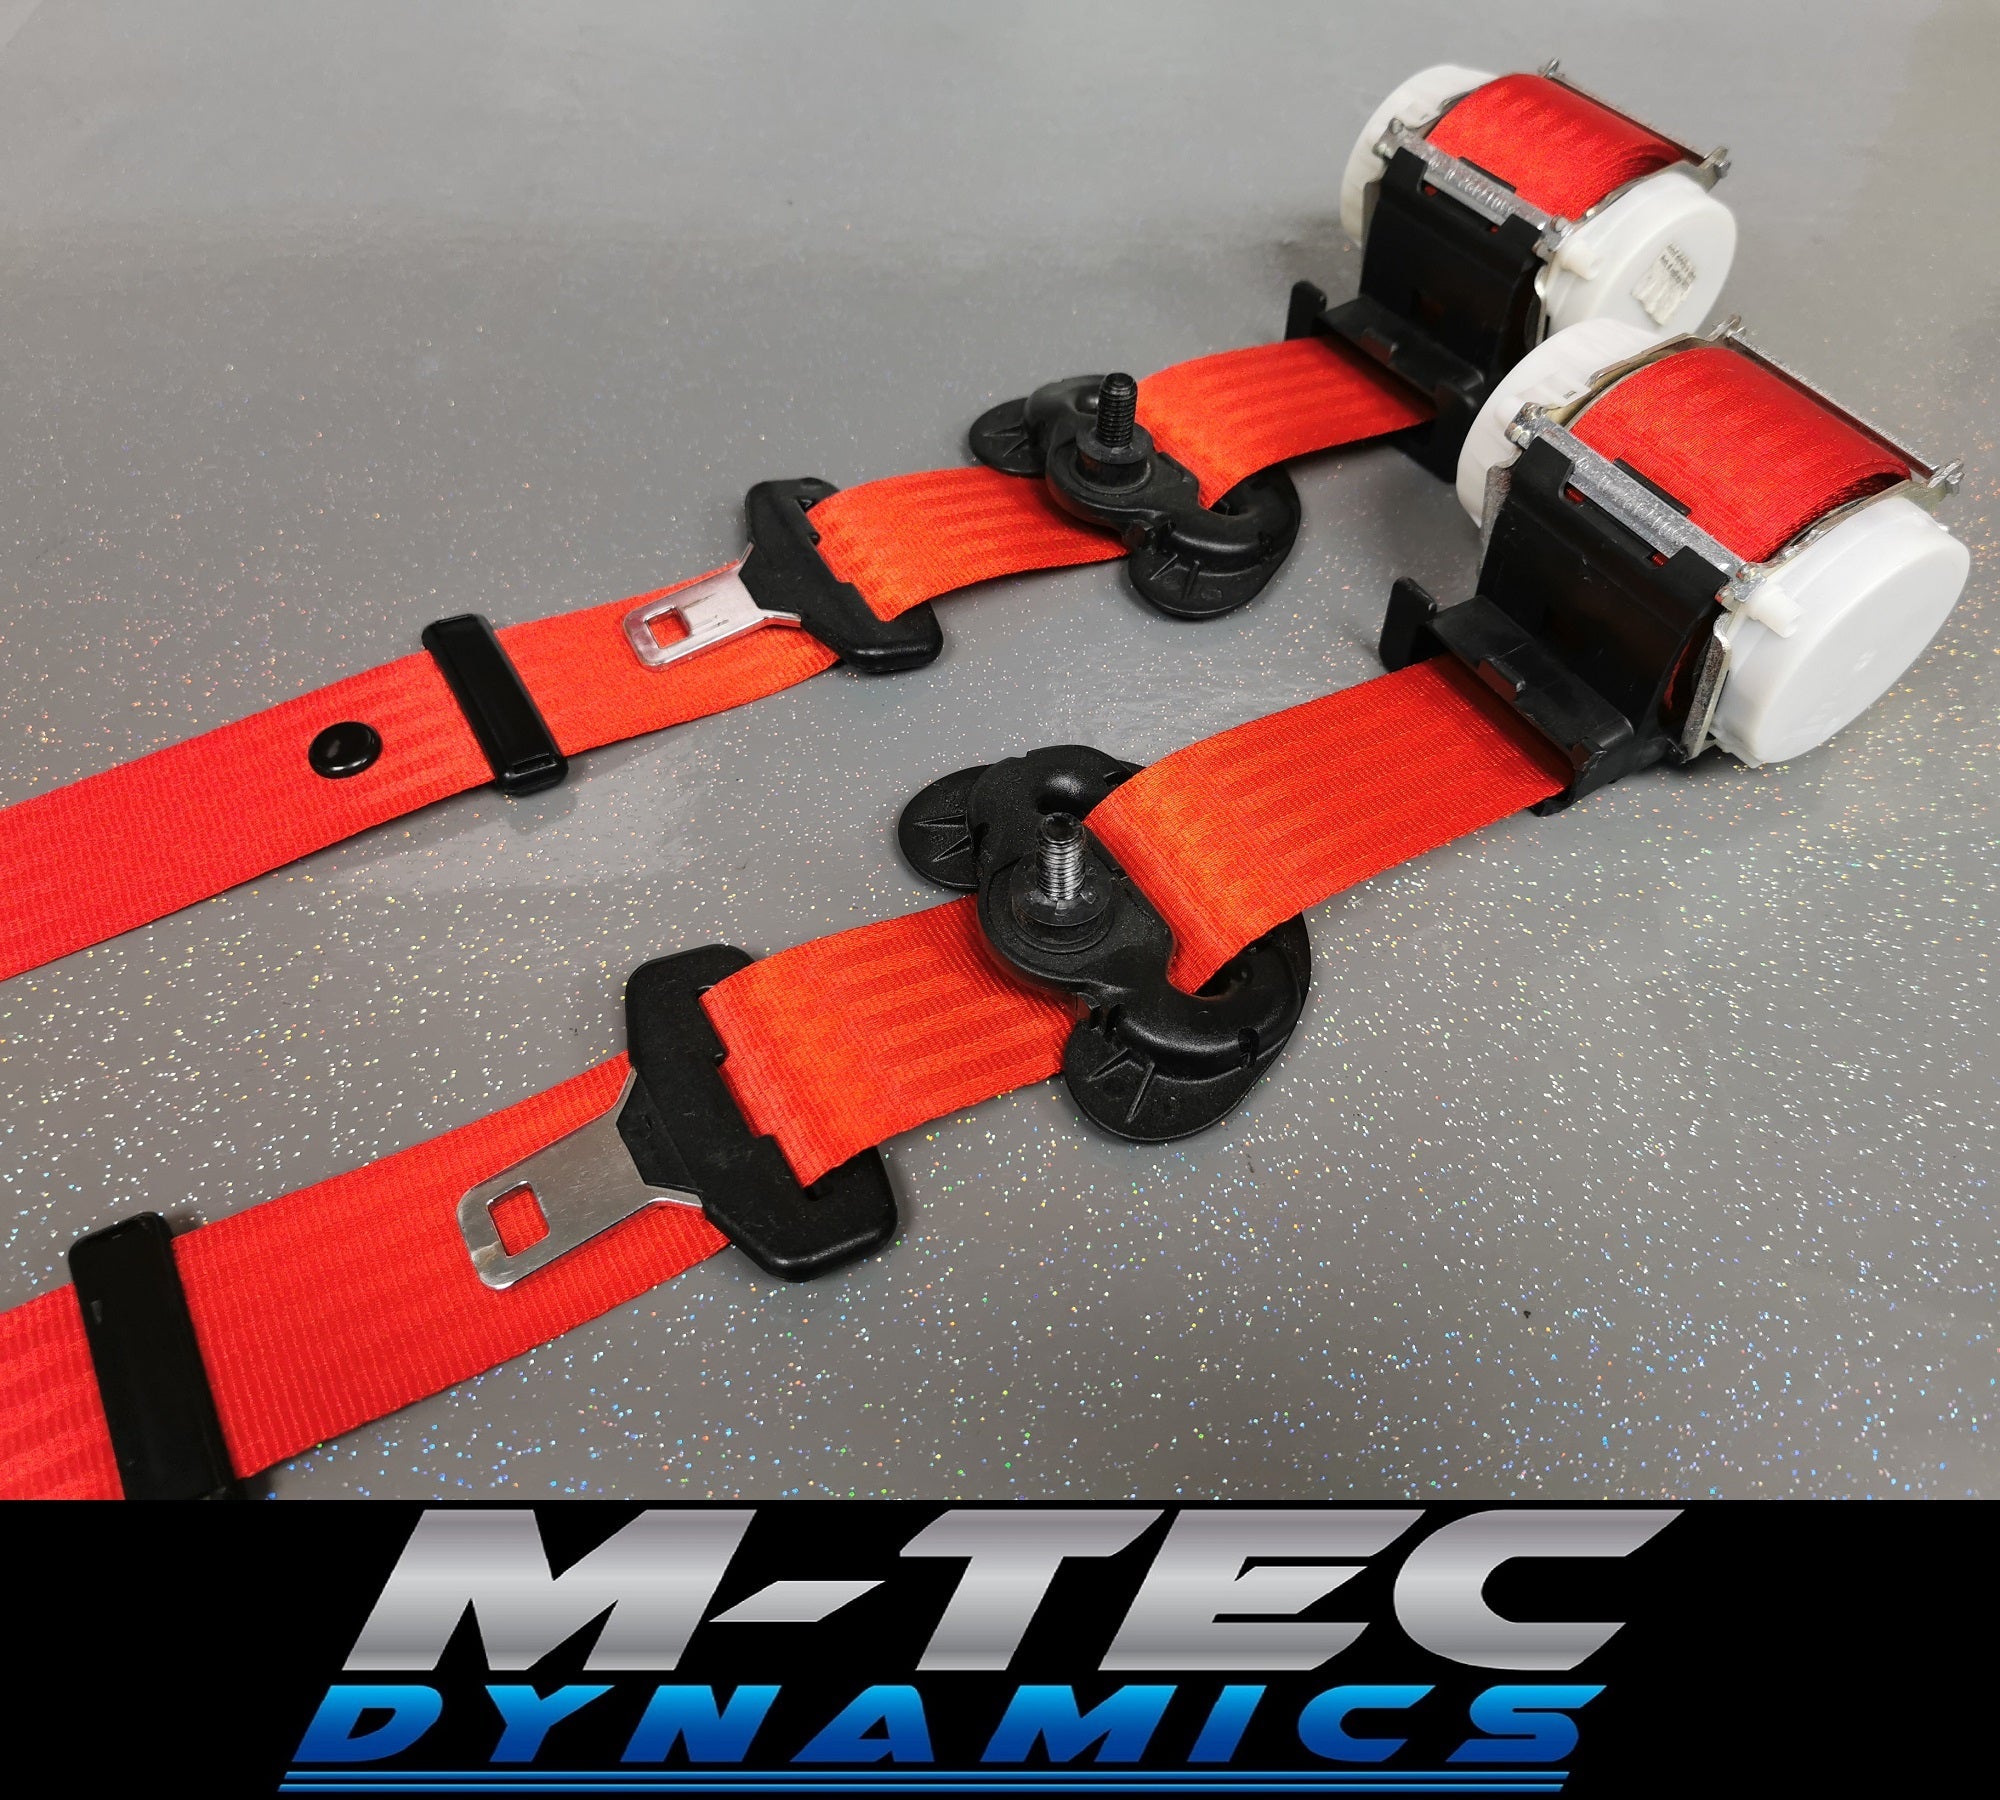 BMW 1-SERIES E81 / E82 COUPE (1M) RED FRONT SEAT BELT SET